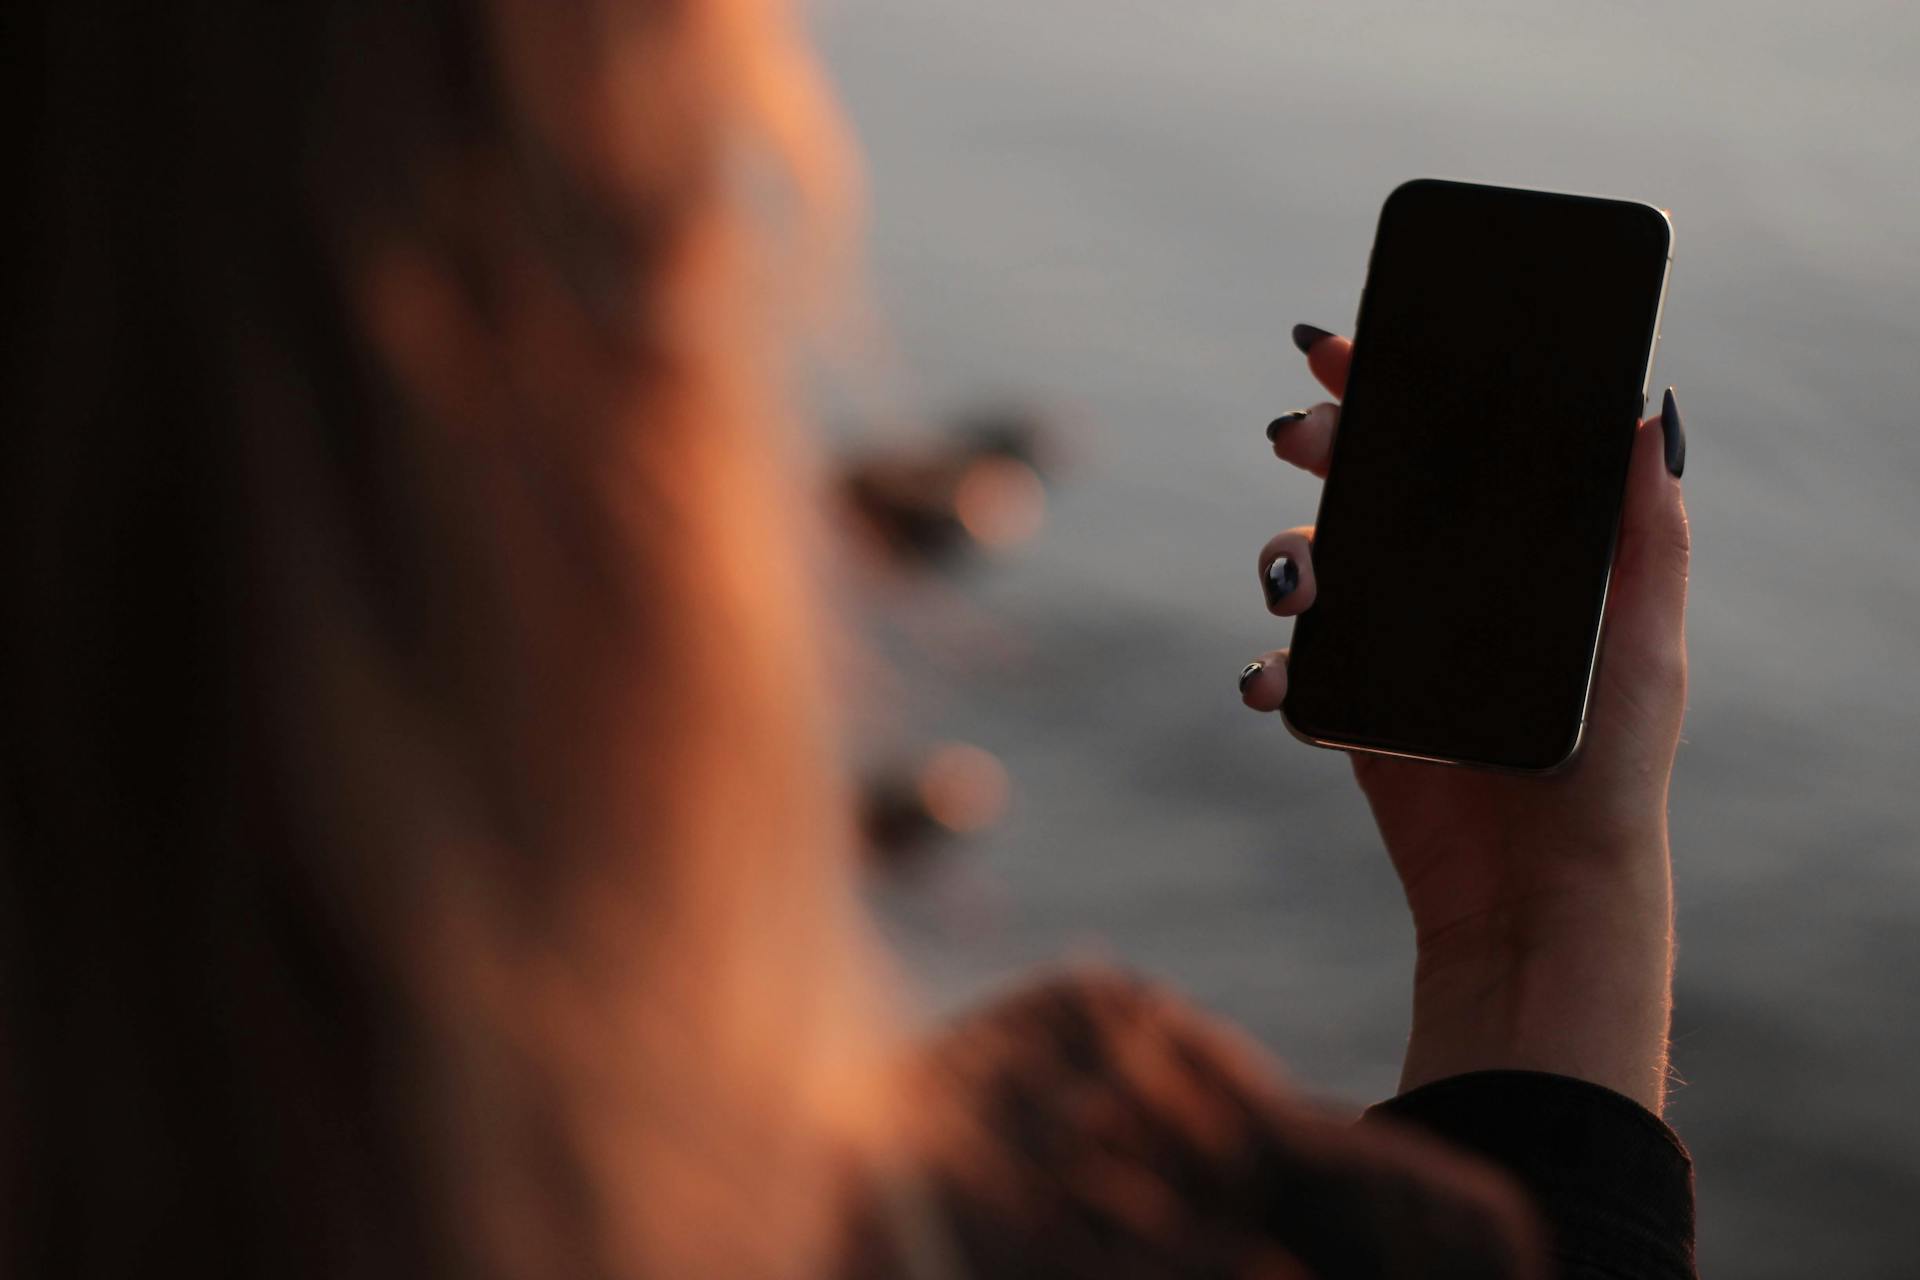 A woman holding a phone | Source: Pexels